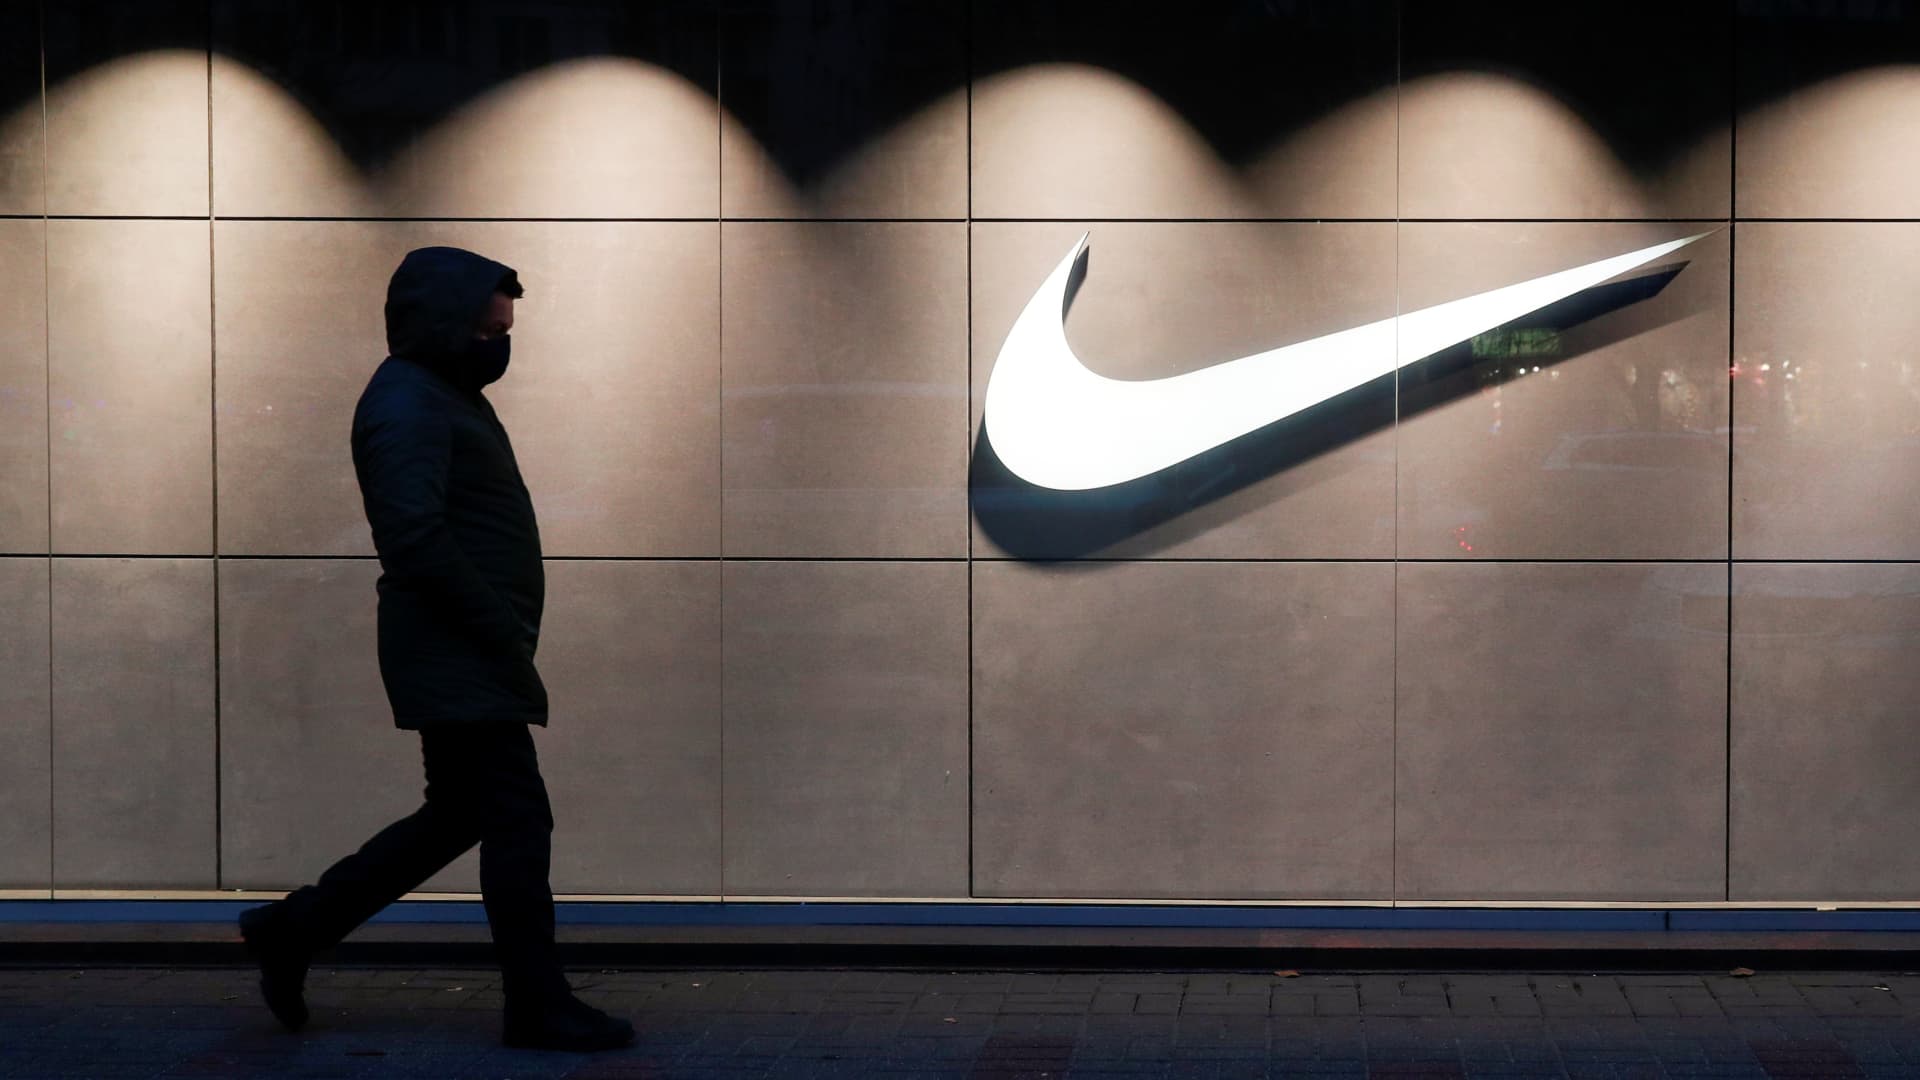 Big Changes at Nike: What Beaverton's Economy Faces After Recent Layoffs